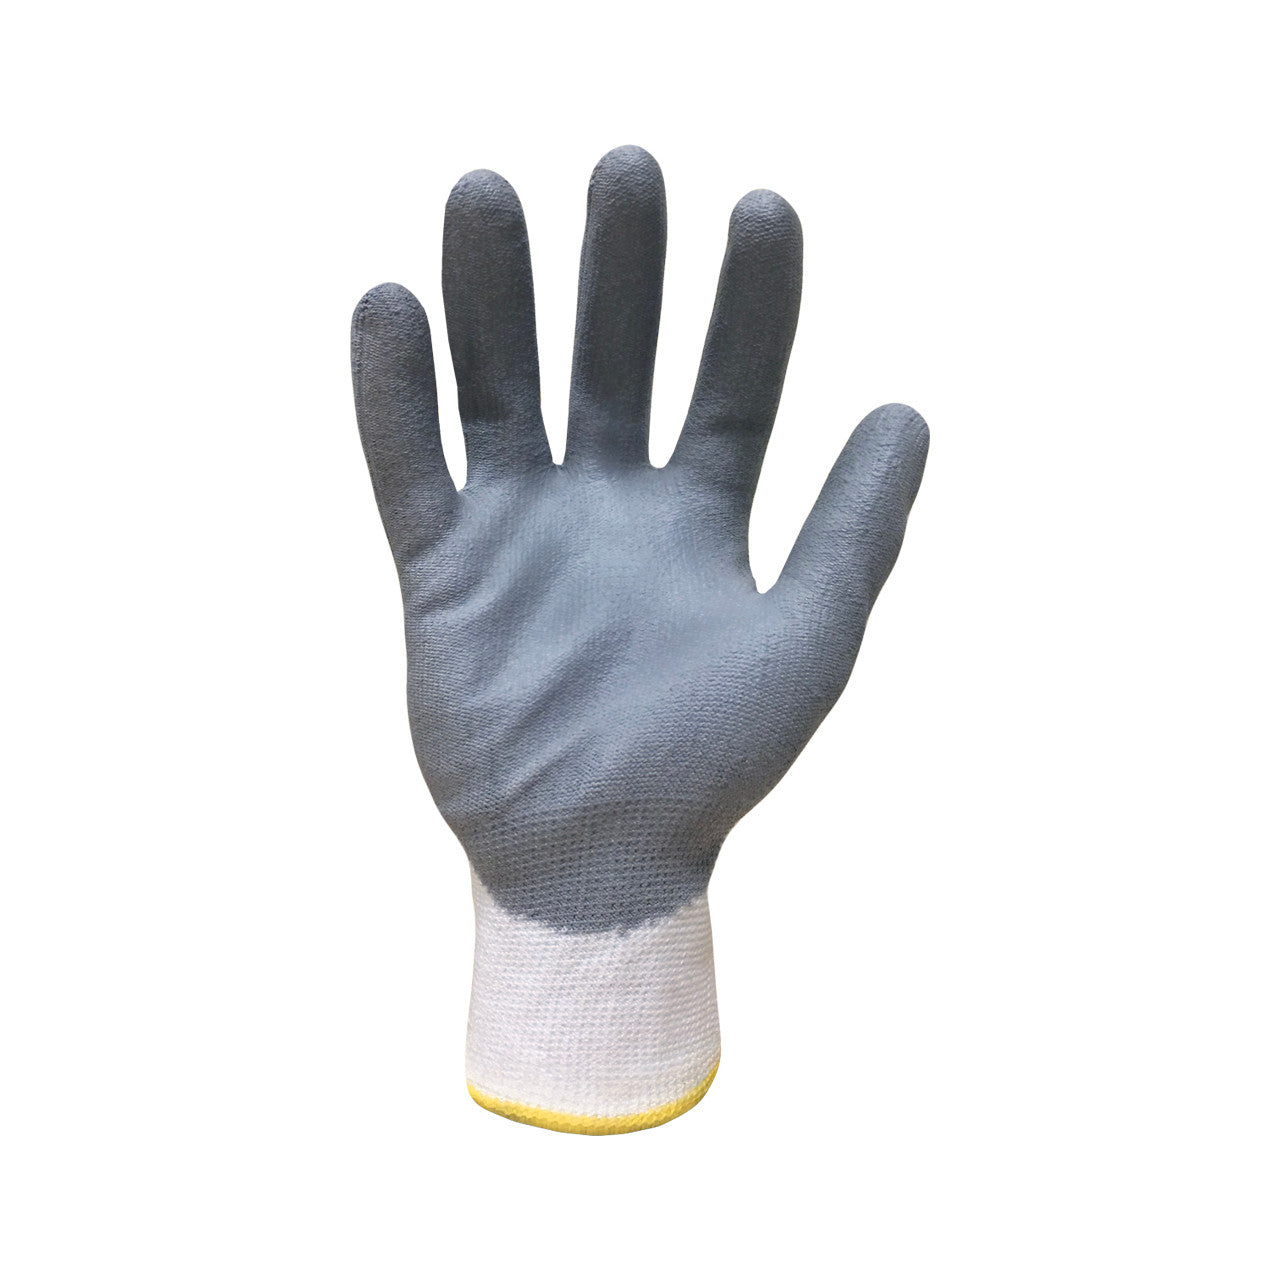 Ironclad Knit Cut 5 Glove White/Gray-eSafety Supplies, Inc